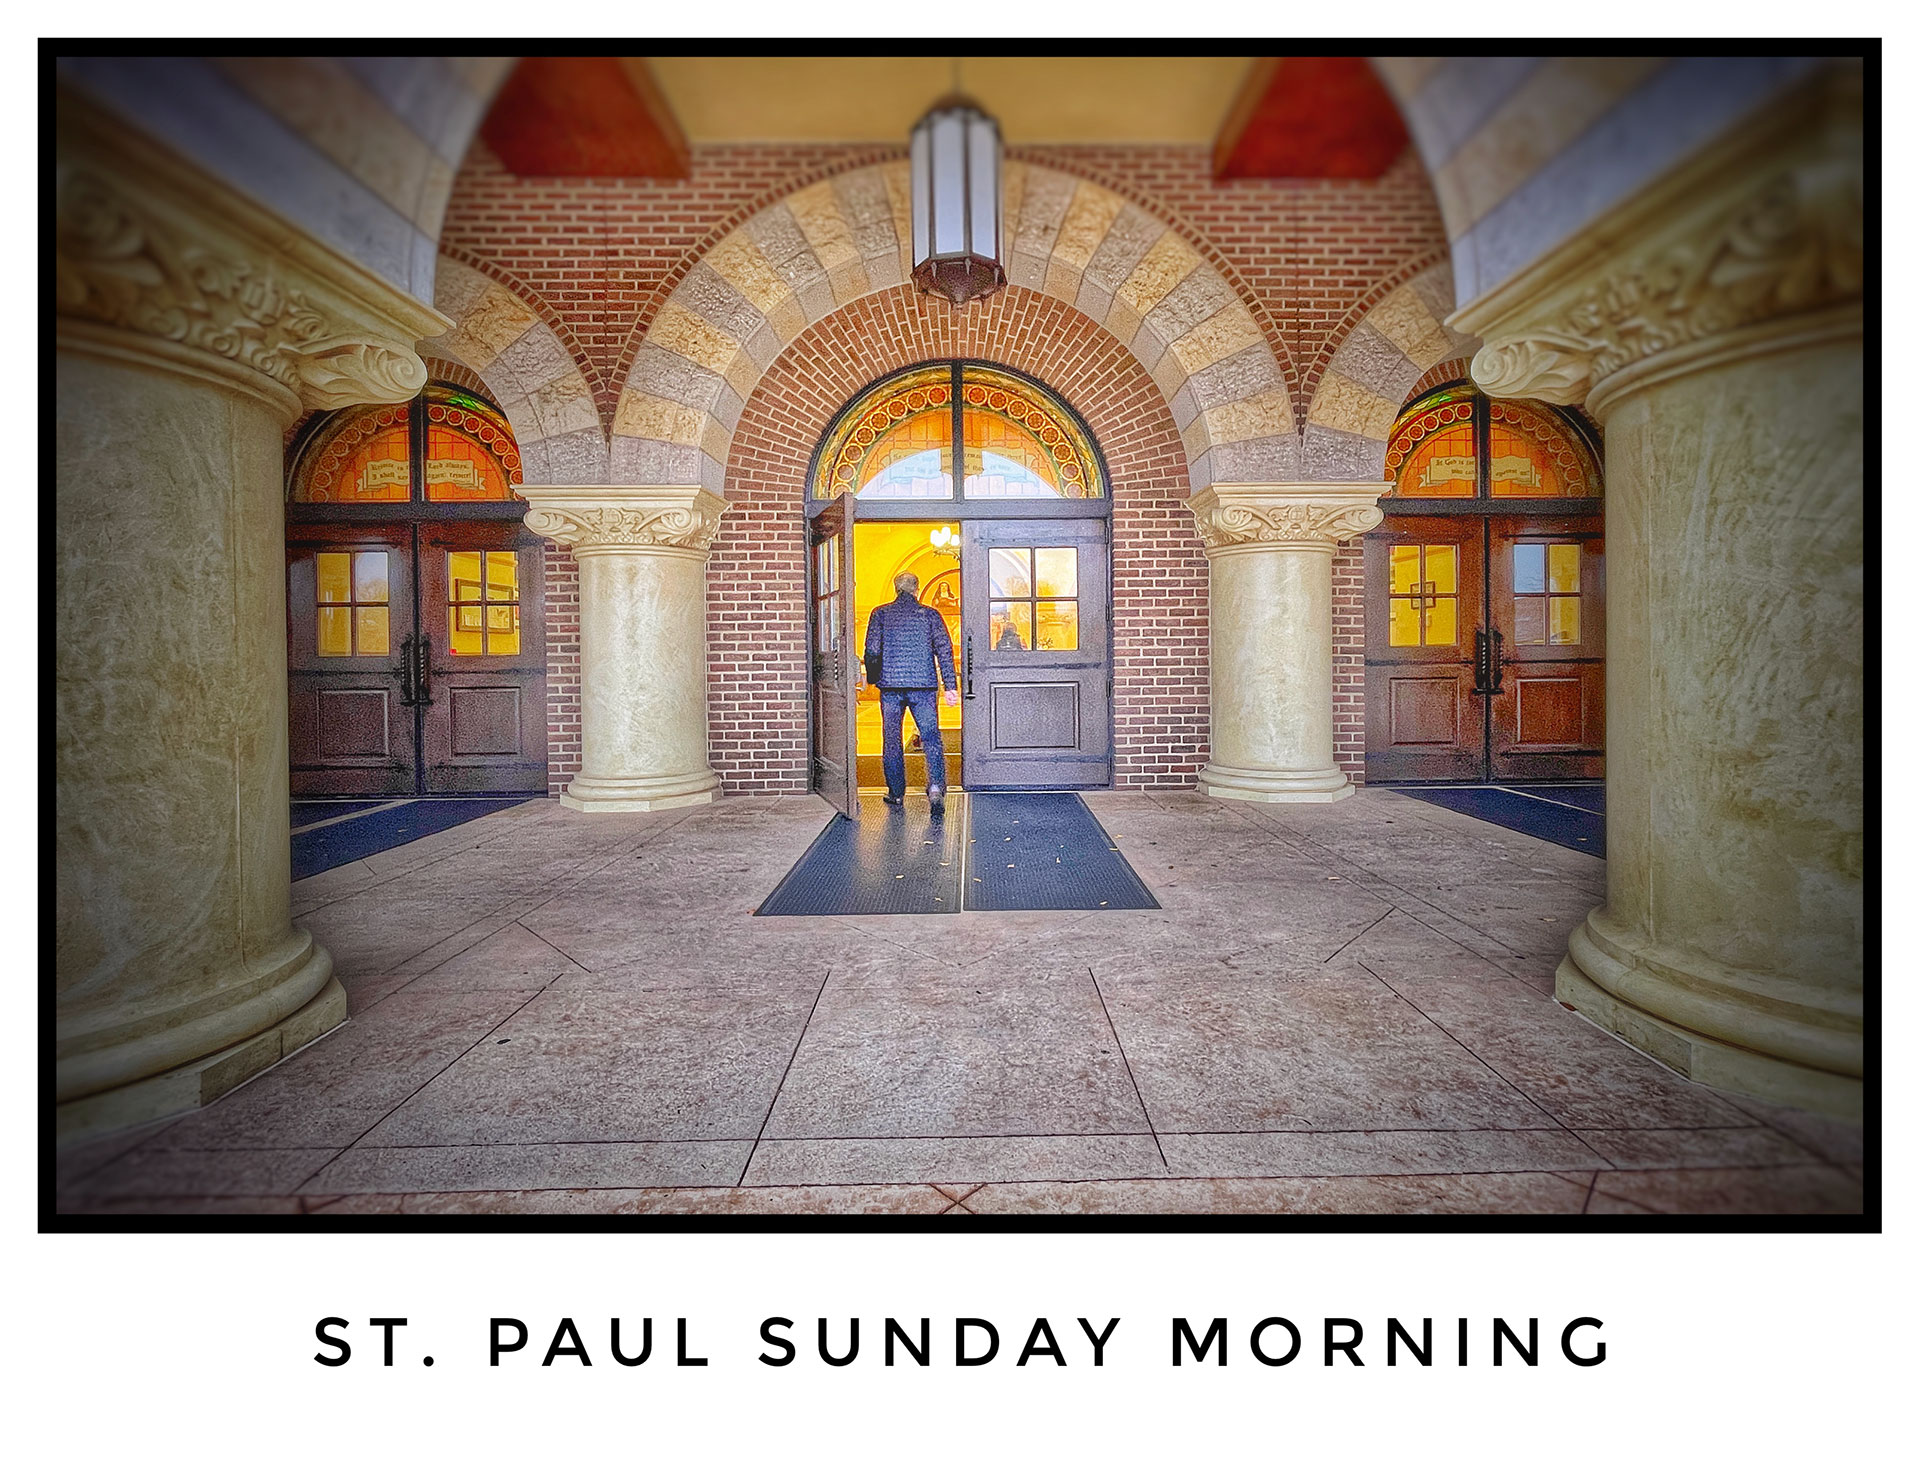 A parishioner enters St. Paul the Apostle Catholic Church for the first Mass of the day. My Final Photo for November 13, 2022.